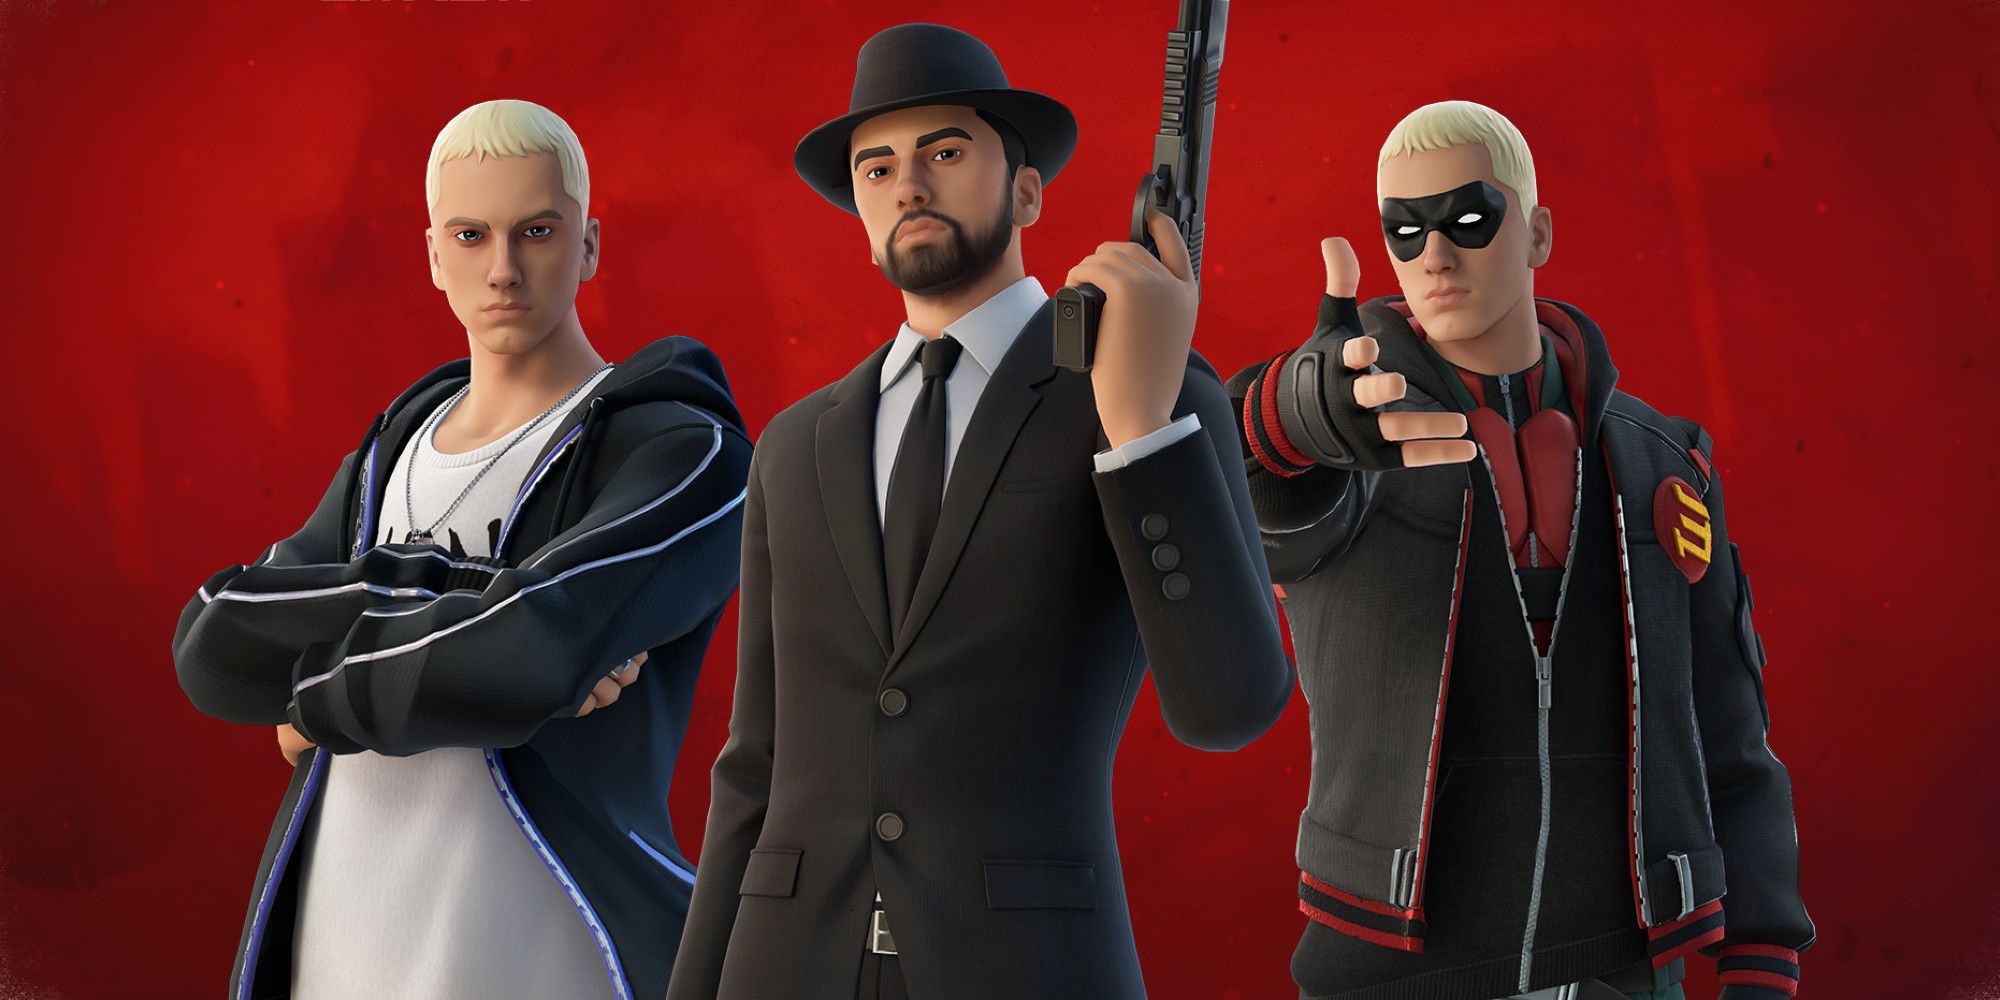 Eninem in Fortnite as Slim Shady, Robin Hood, and wearing a suit